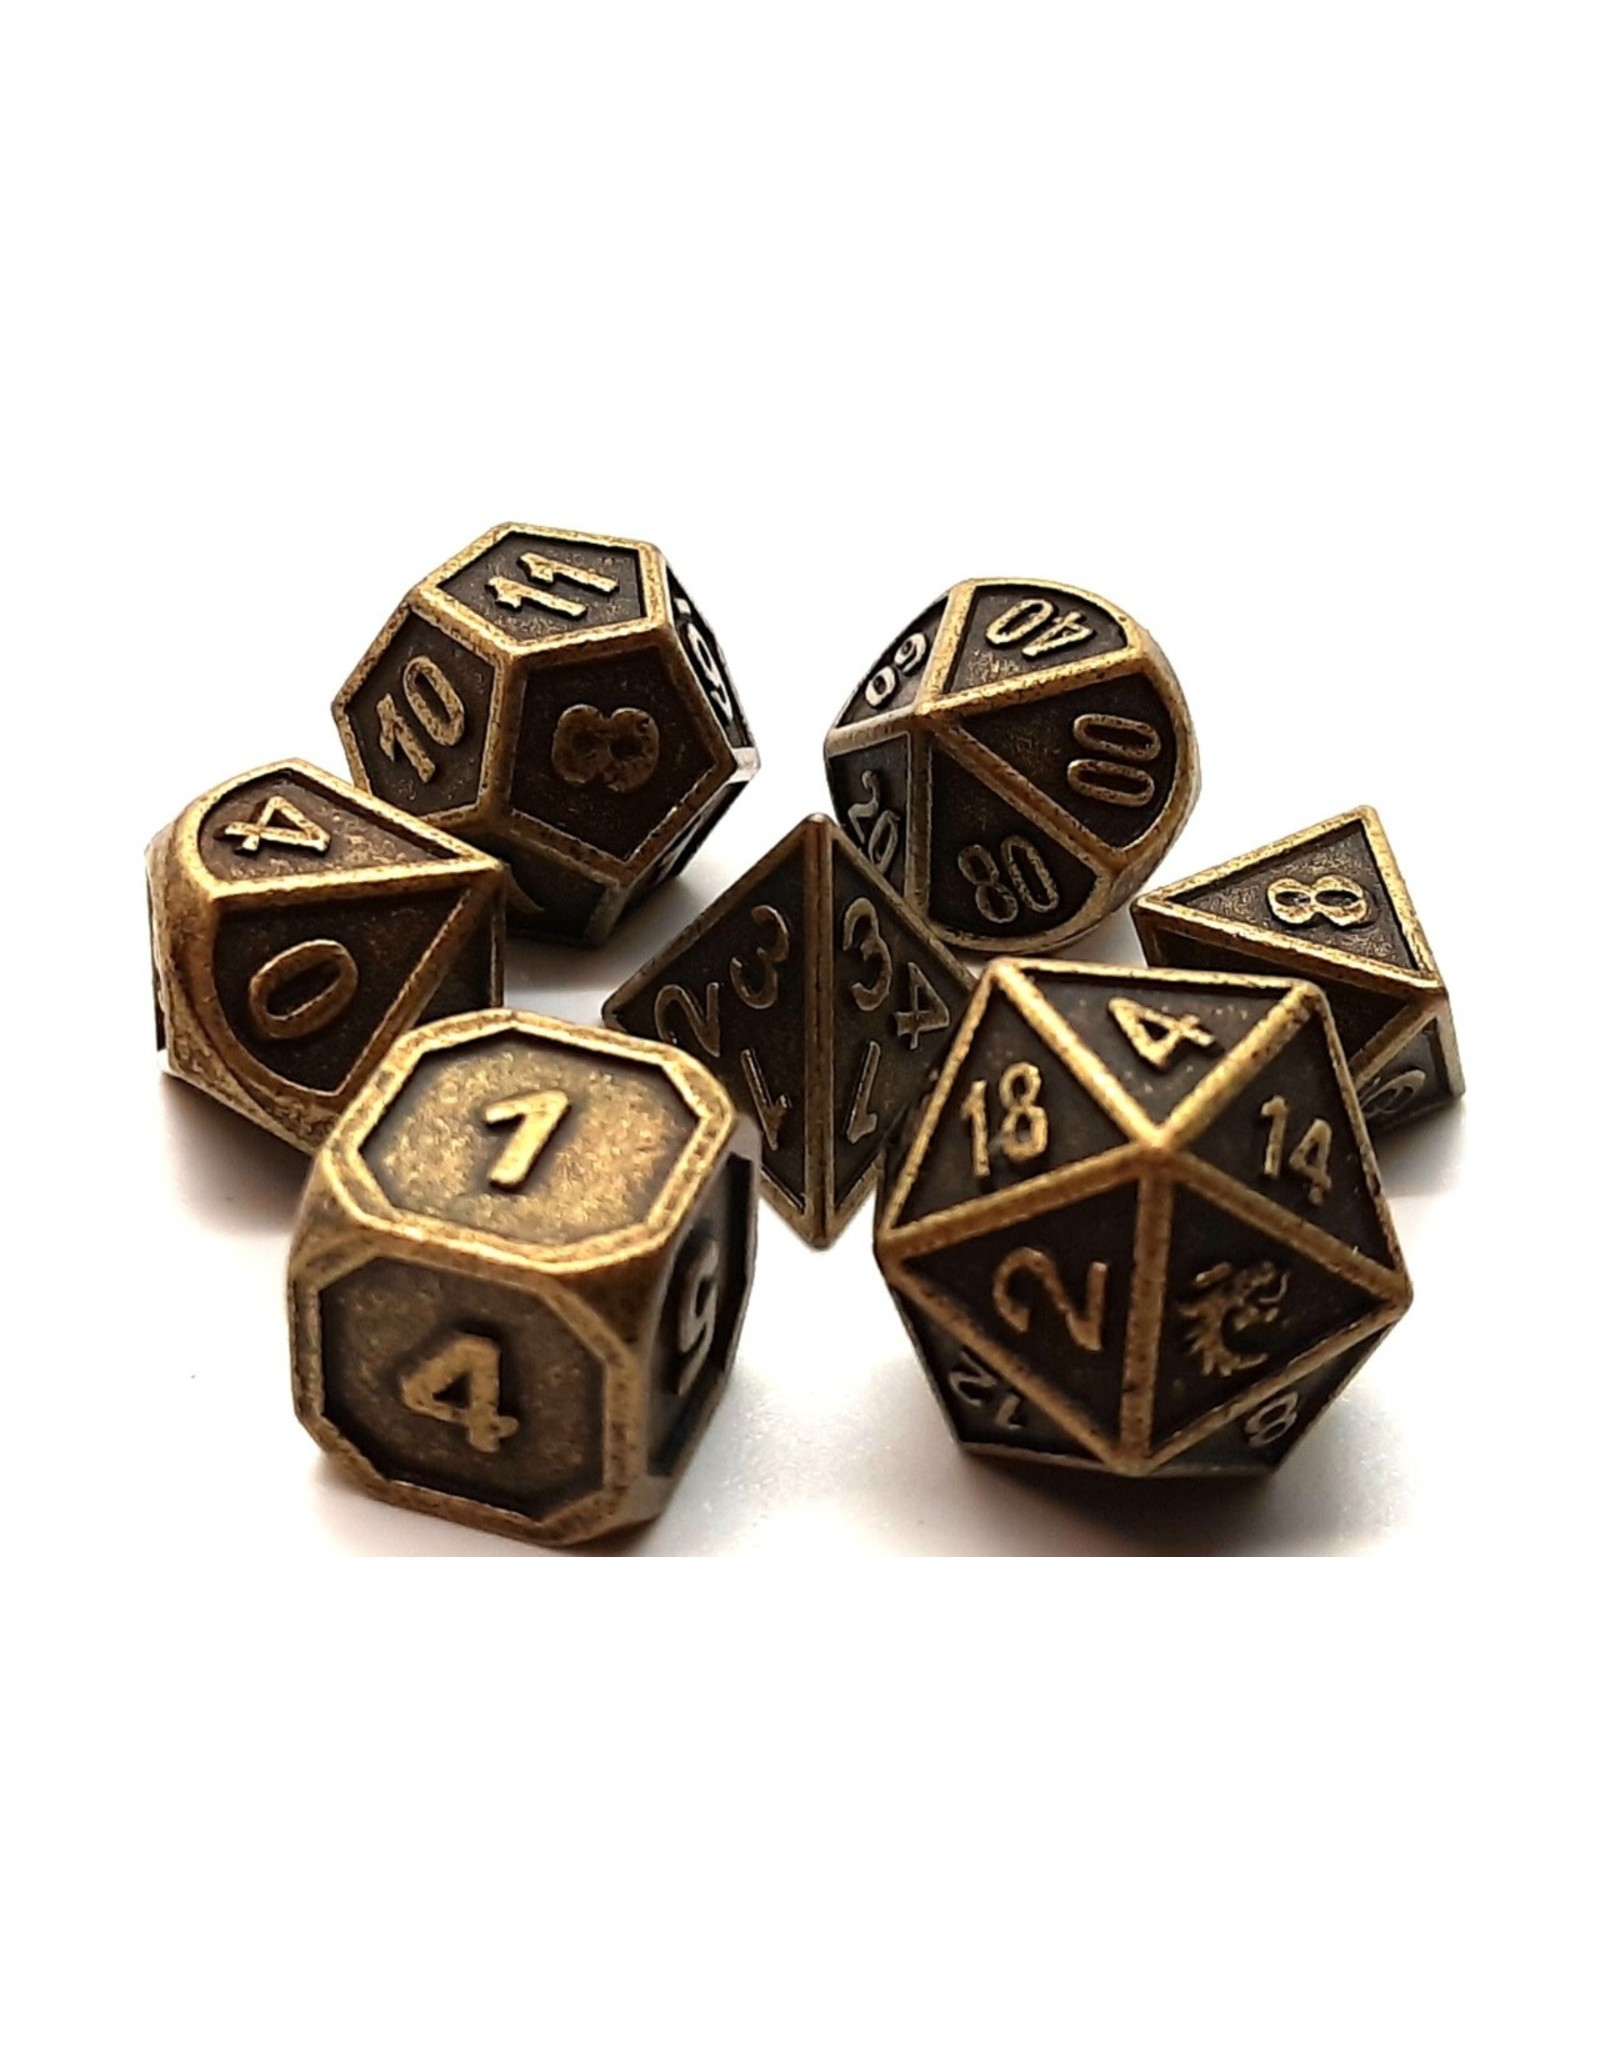 Old School Dice Old School 7 Piece DnD RPG Metal Dice Set: Dwarven Forged - Ancient Gold